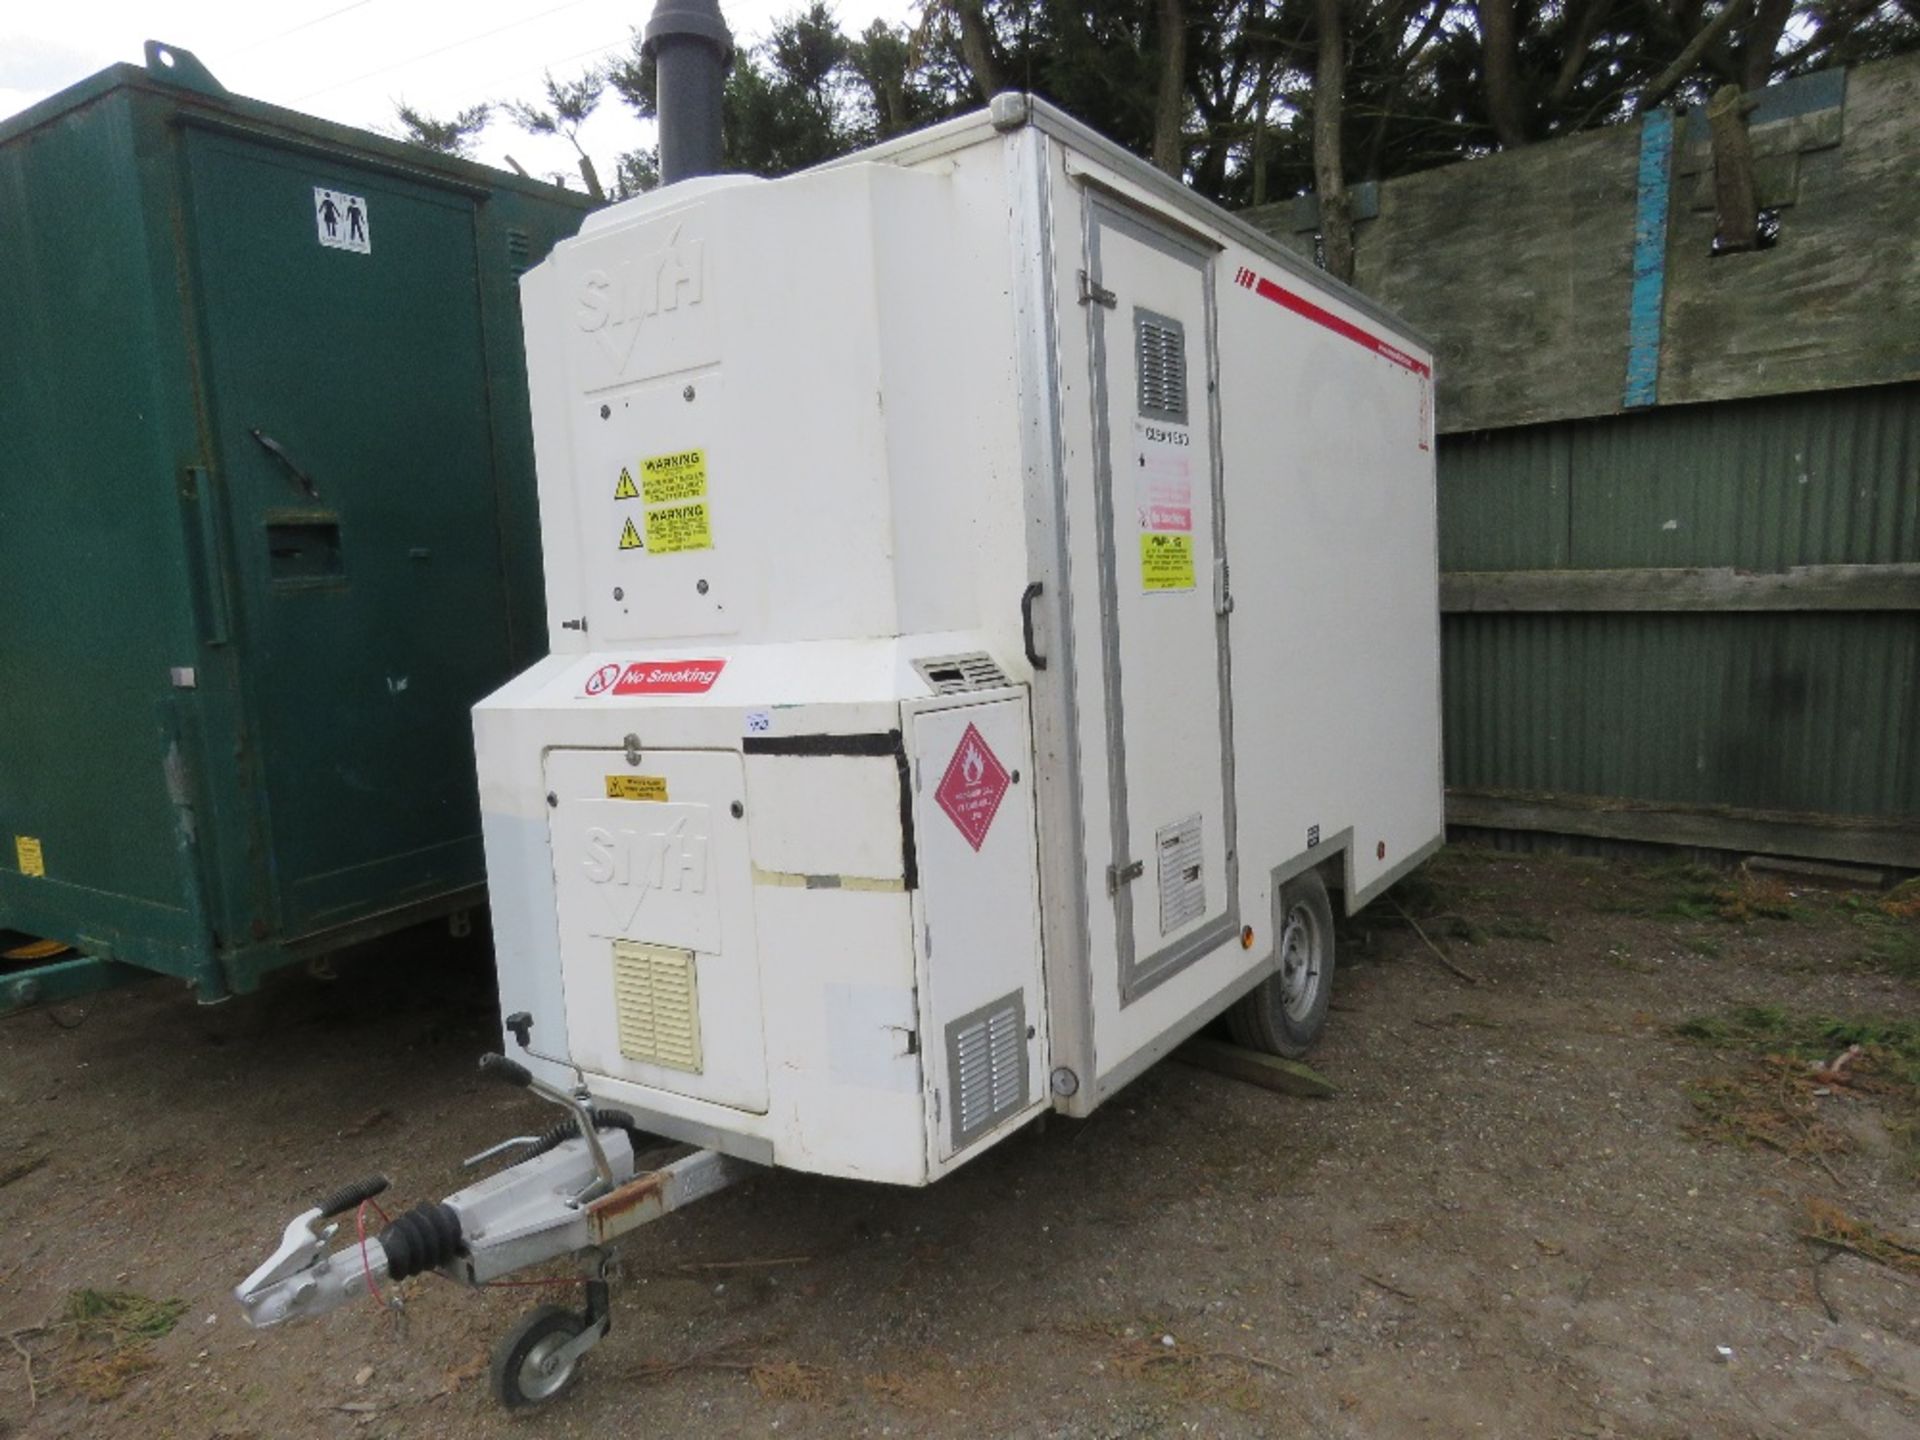 SMH DECONTAMINATION TRAILER, SINGLE AXLED. 10FT BODY SIZE APPROX. WITH HONDA GAS/PETROL GENERATOR &